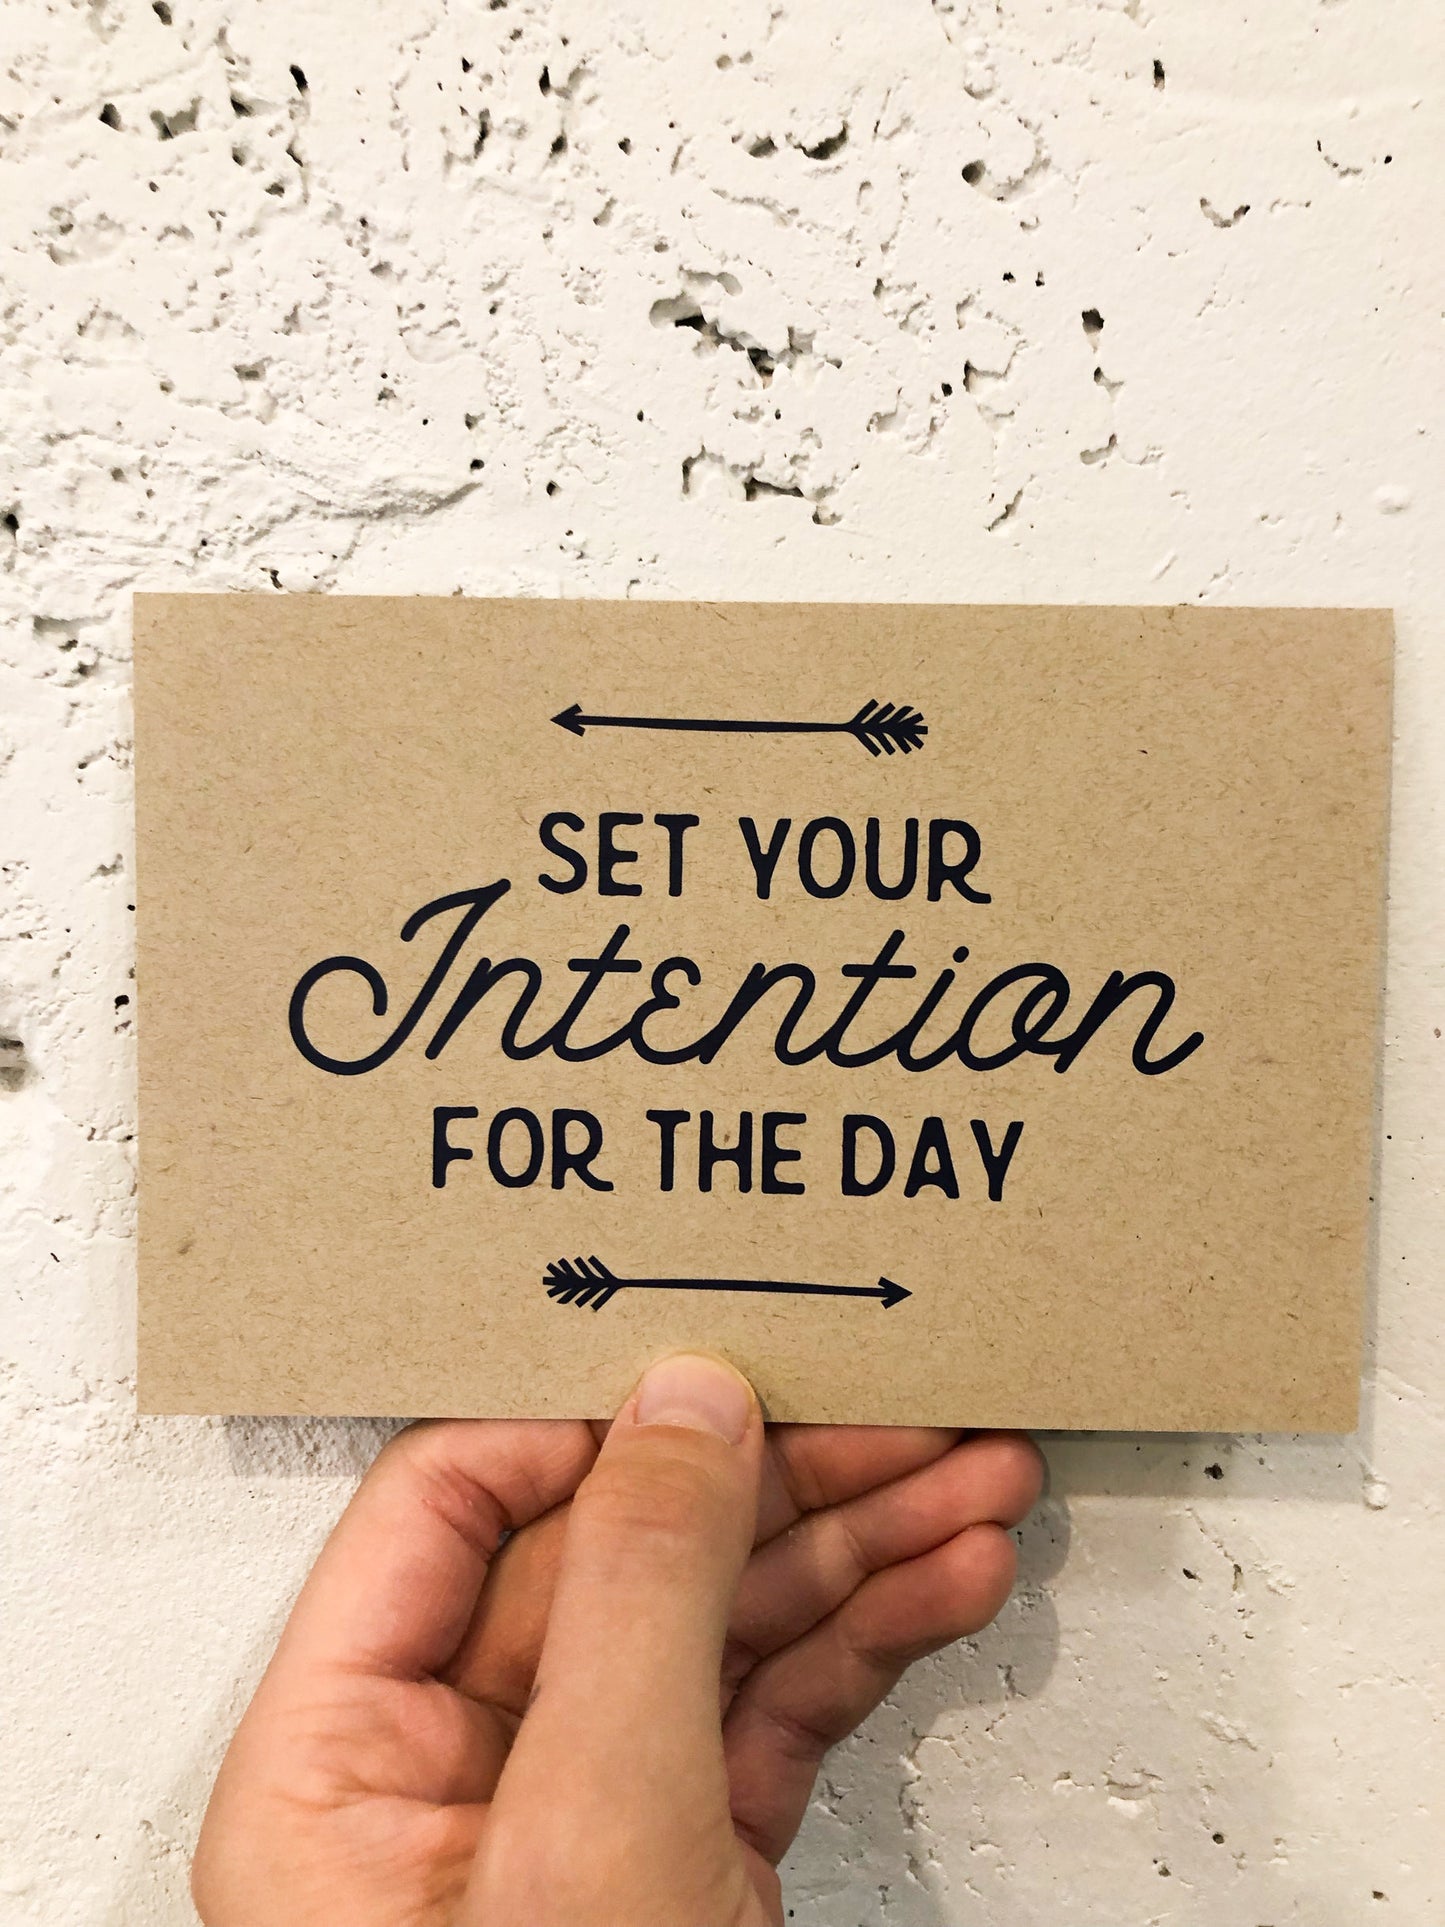 Sparkplug Creative - Set your Intention For The Day Postcard